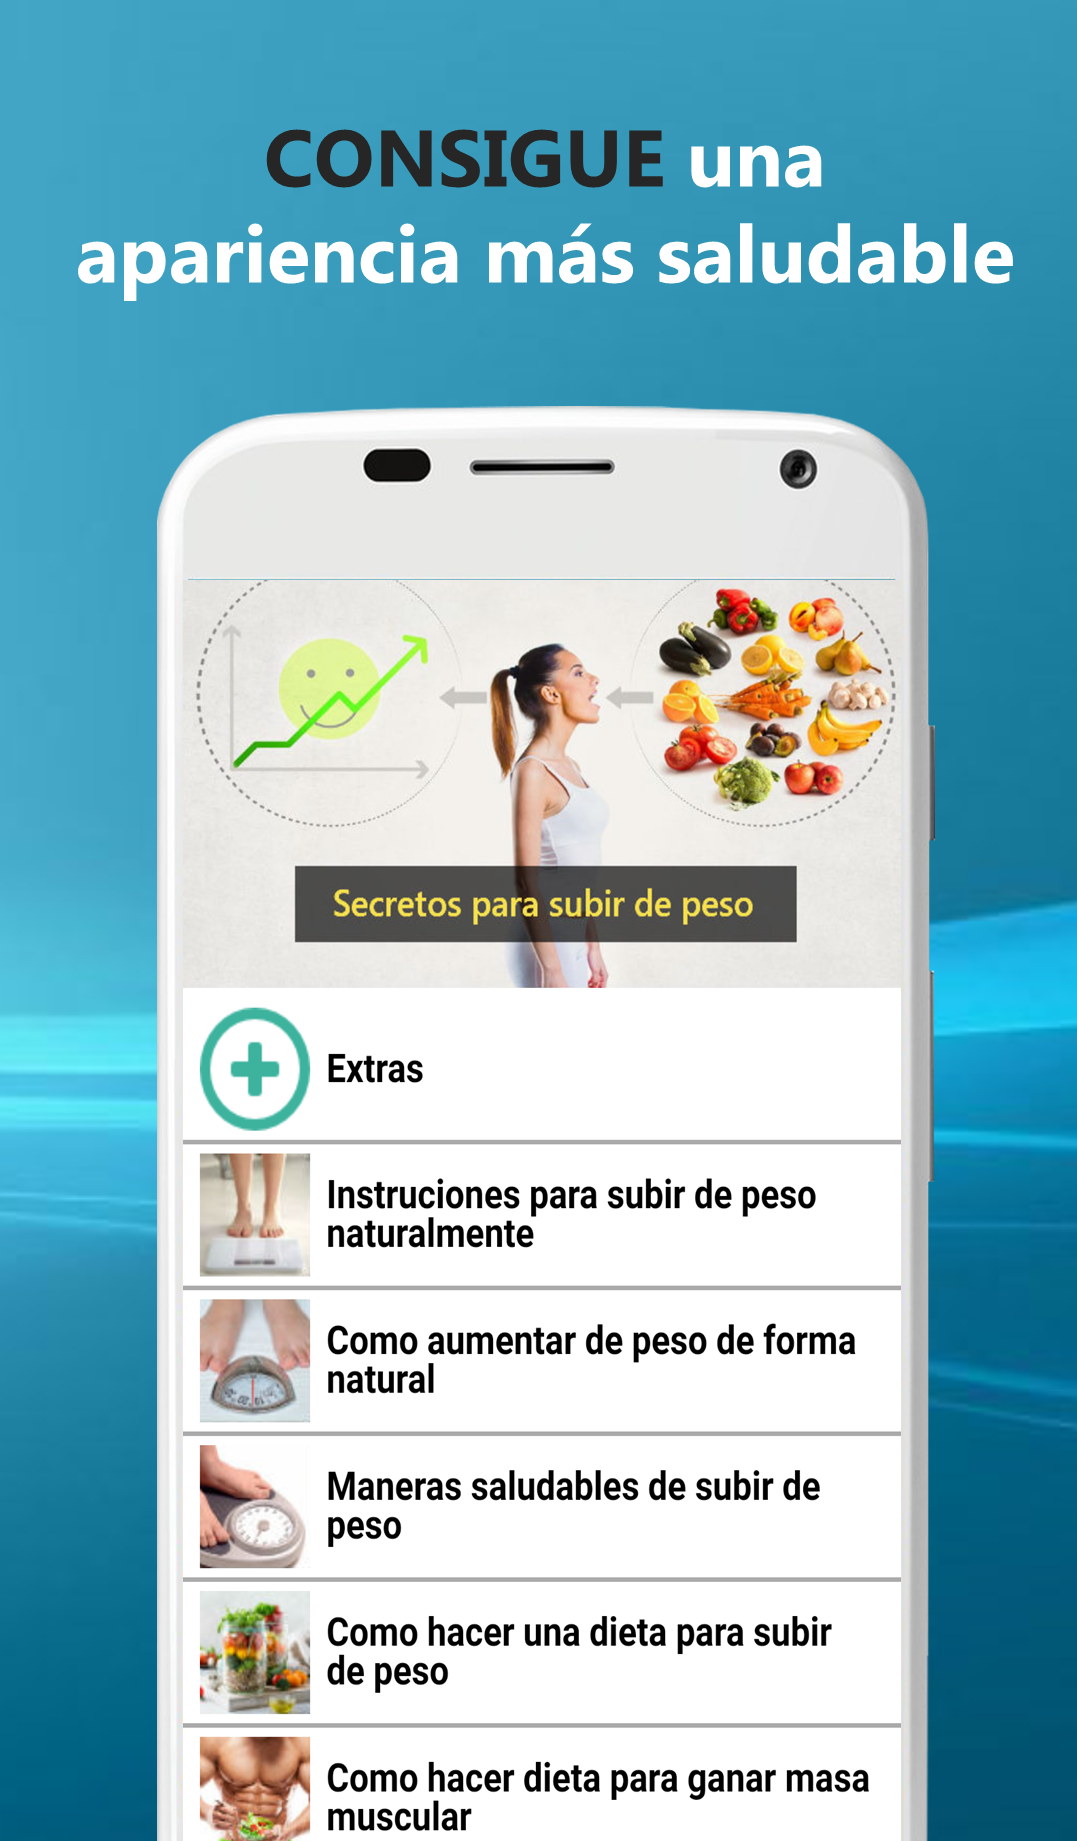 Secrets to gain weight APK 13.0.0 for Android – Download Secrets to gain  weight XAPK (APK Bundle) Latest Version from APKFab.com